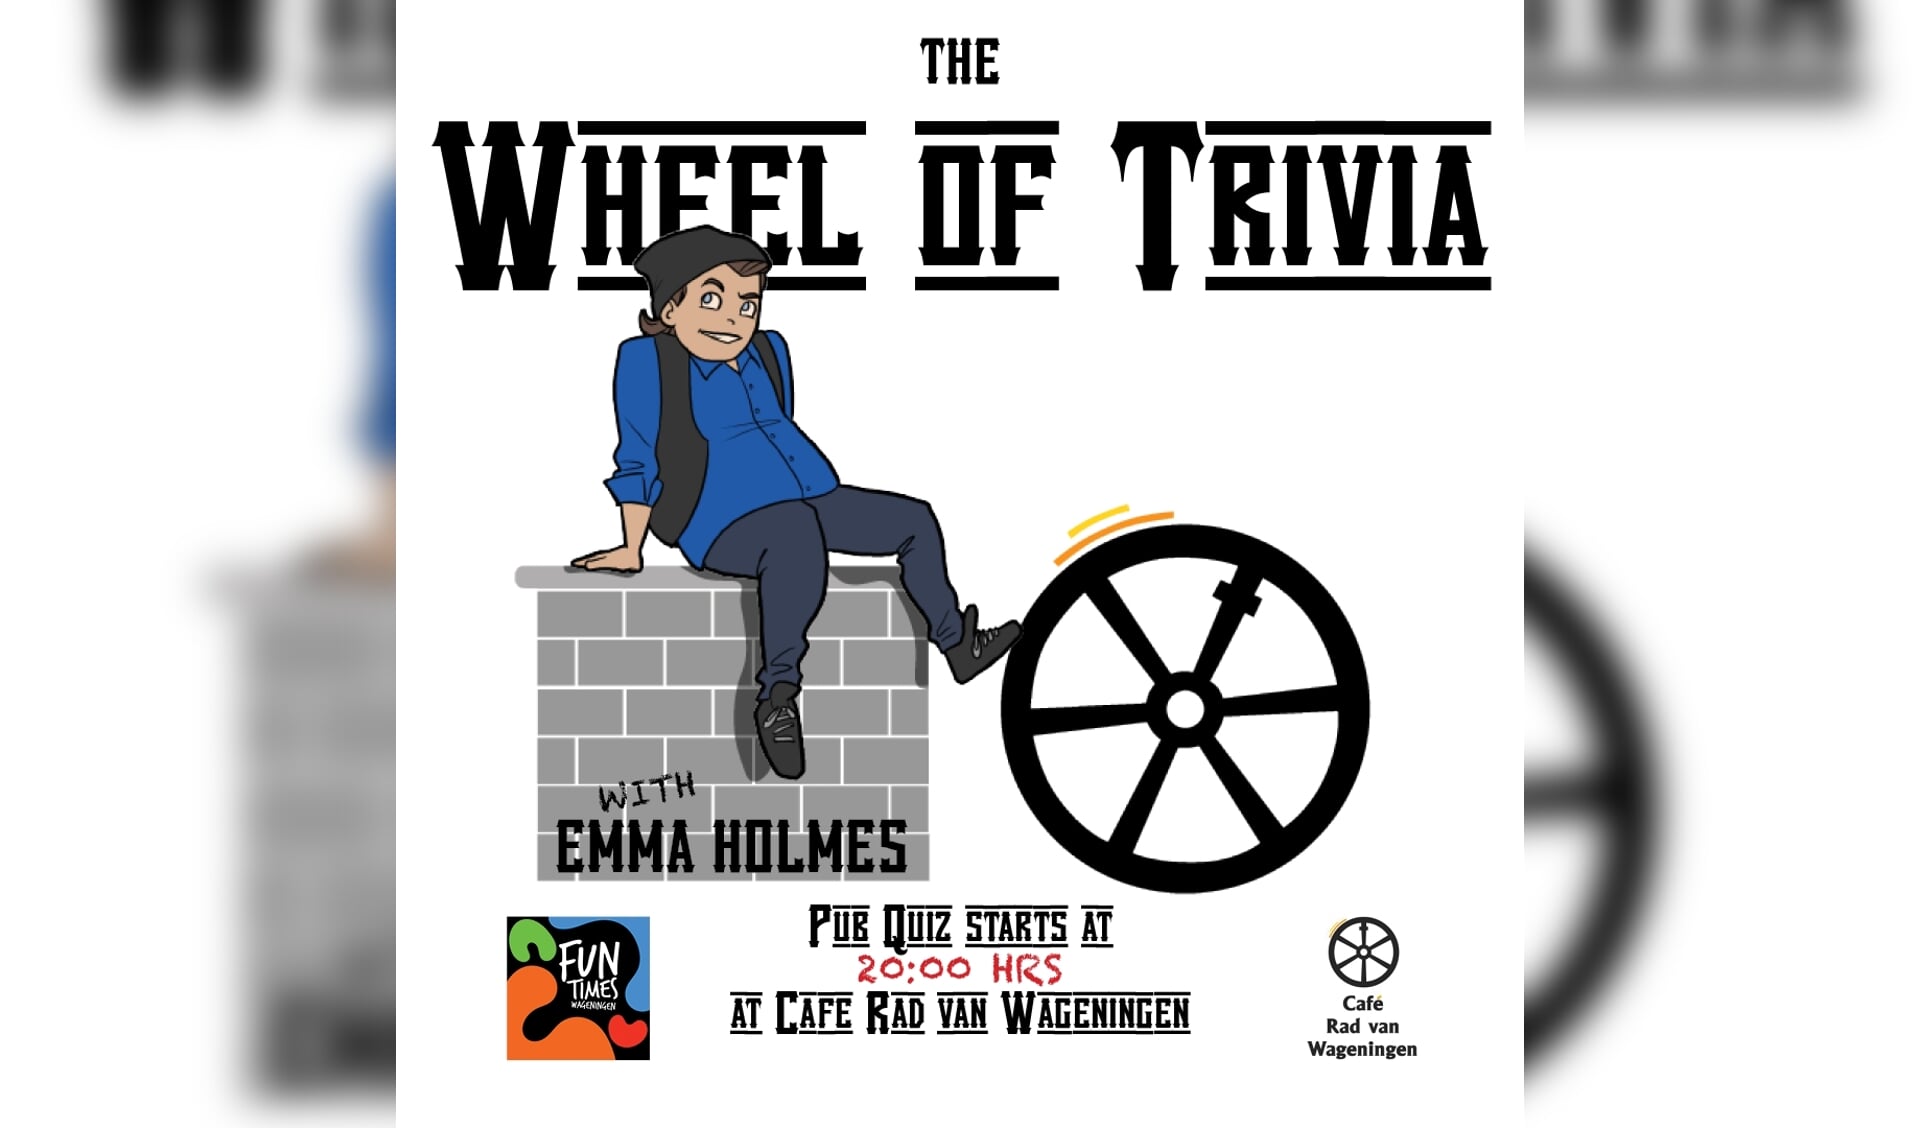 Cafe Rad van Wageningen is putting on a pub quiz with local bubbly host, Emma Holmes.